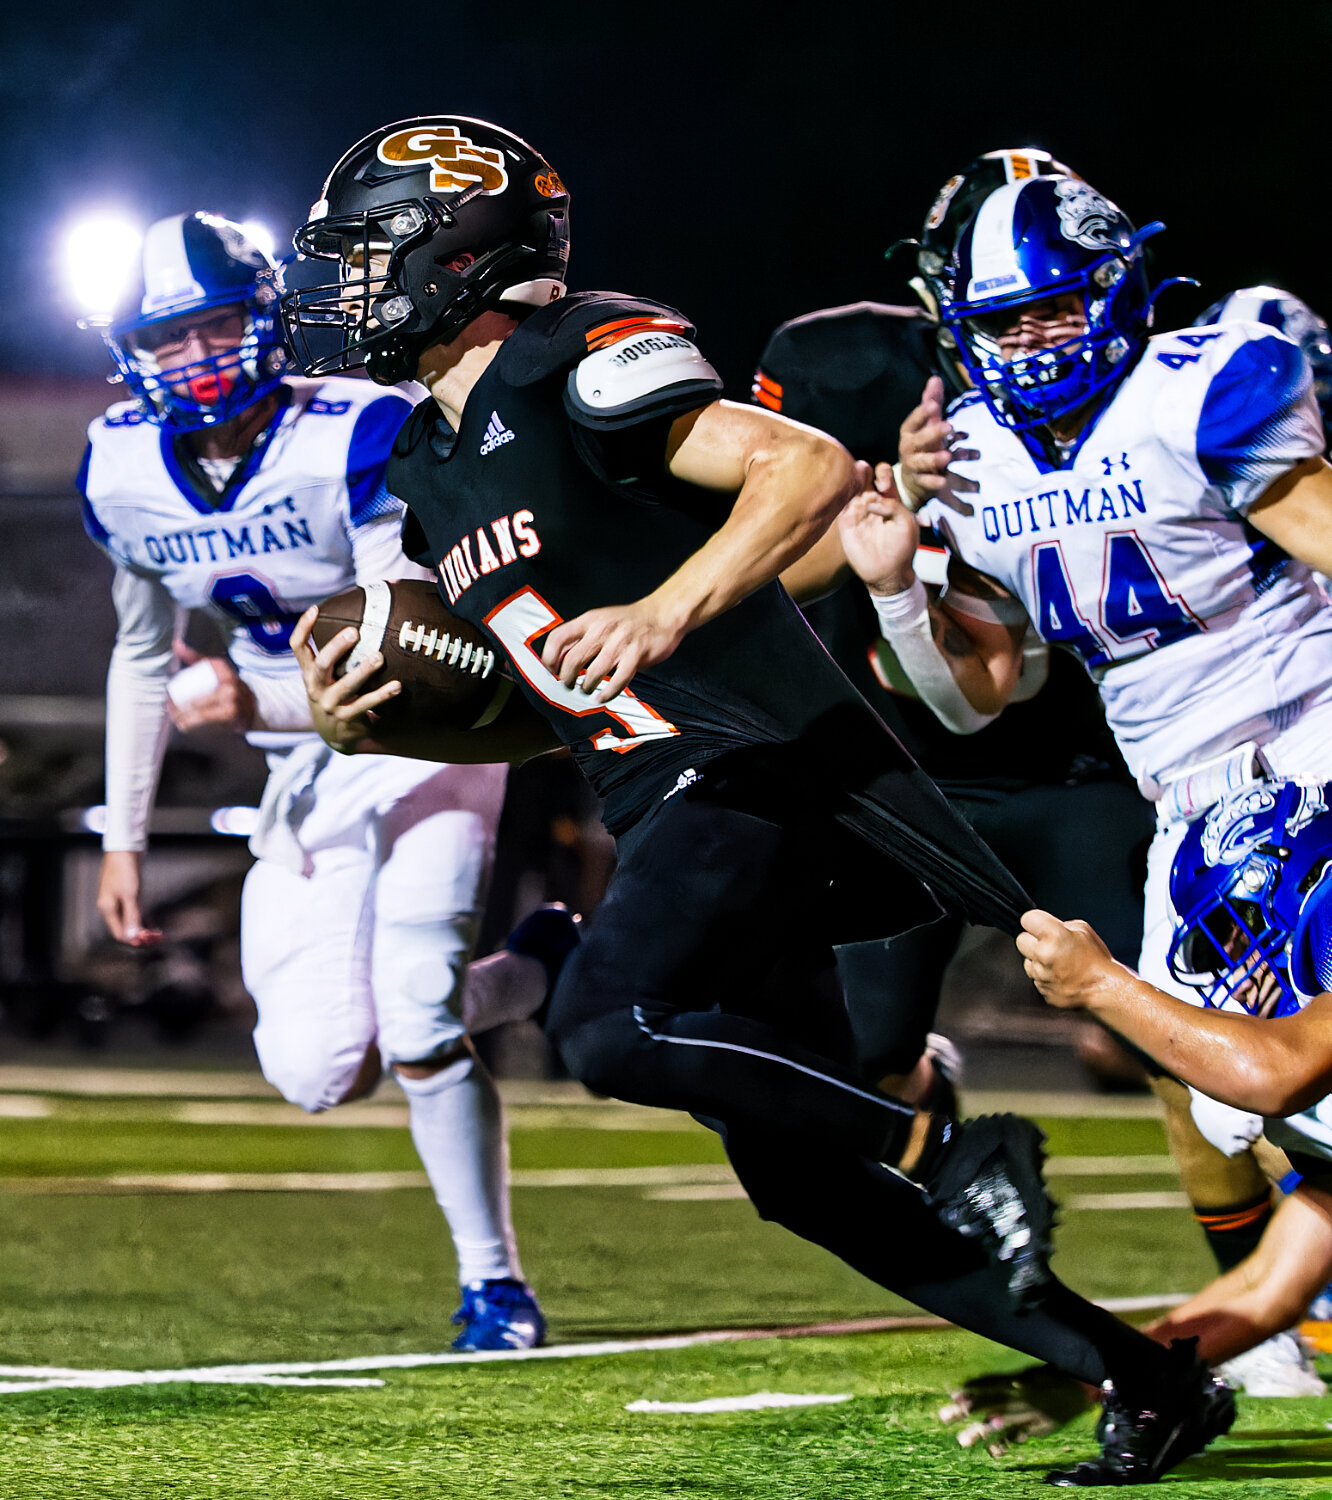 Jaxon Wilson and Landon Green come to their teammate's aid in tracking down Grand Saline quarterback Jett Taylor. [few more photos here]